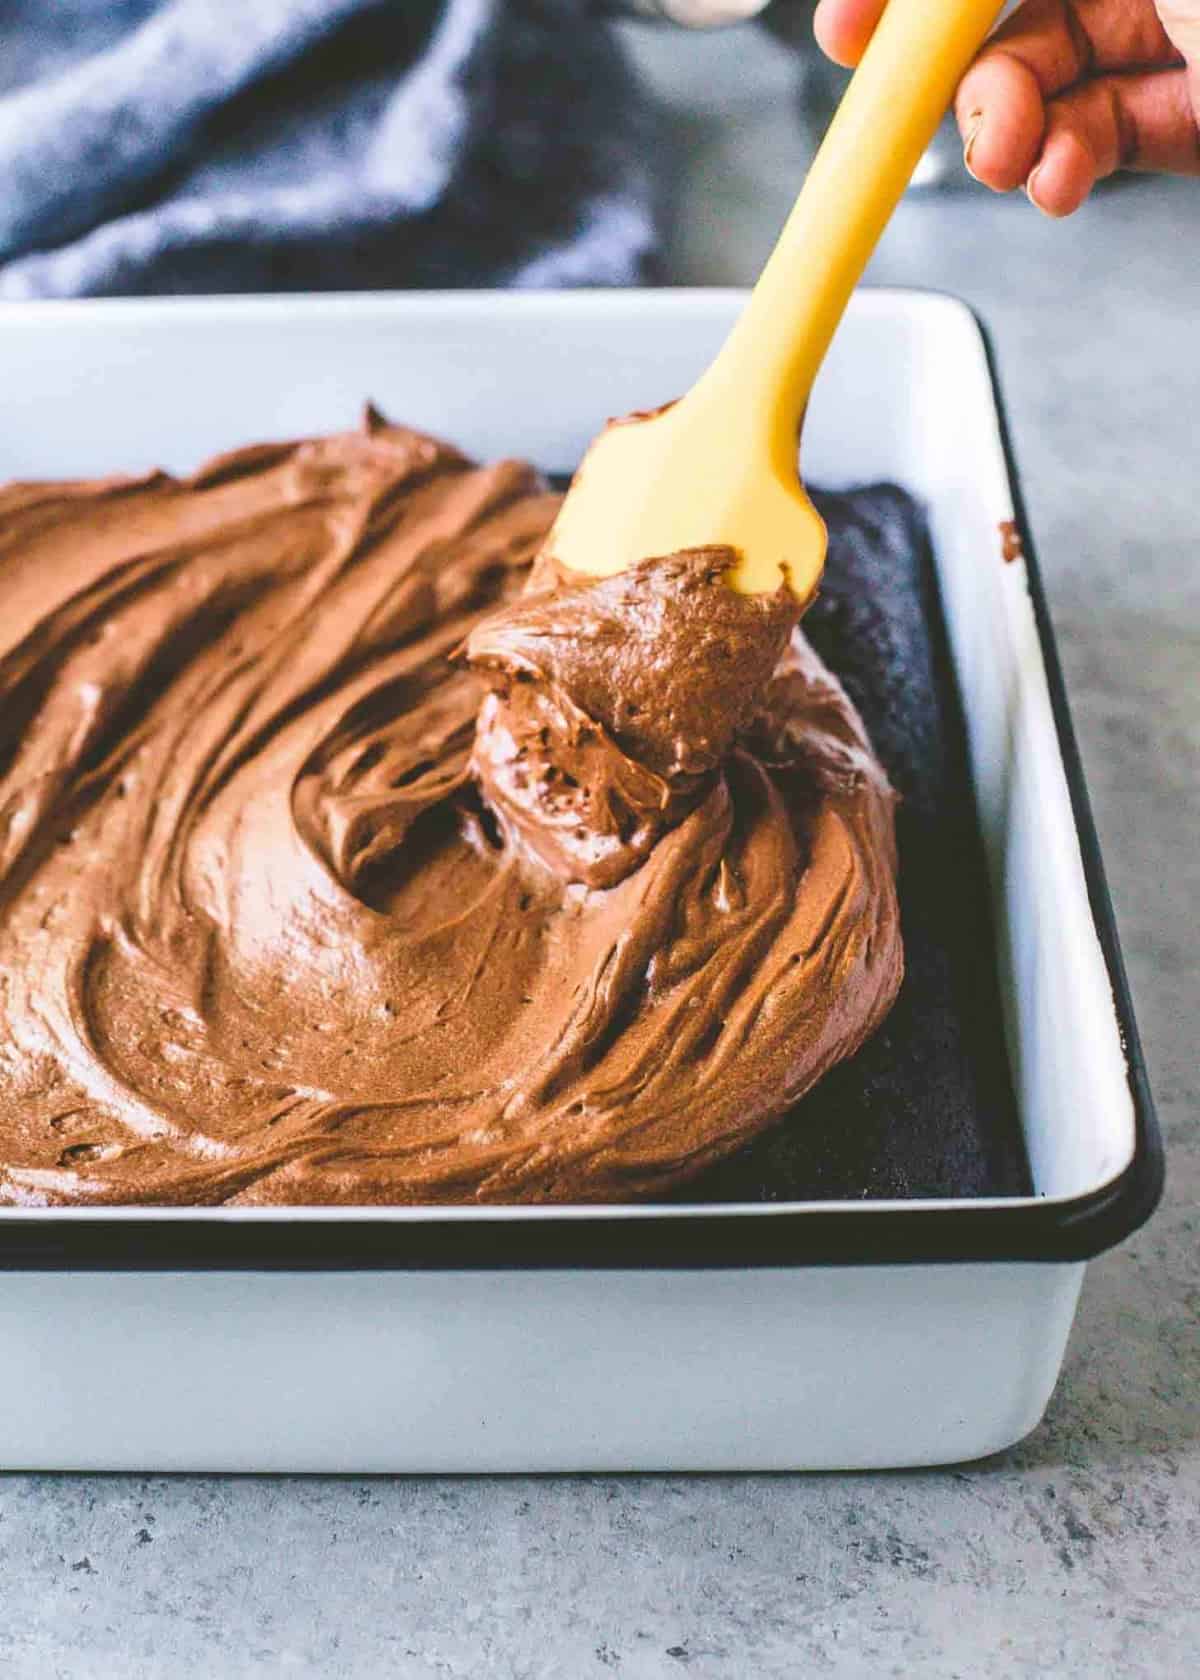 frosting a chocolate cake